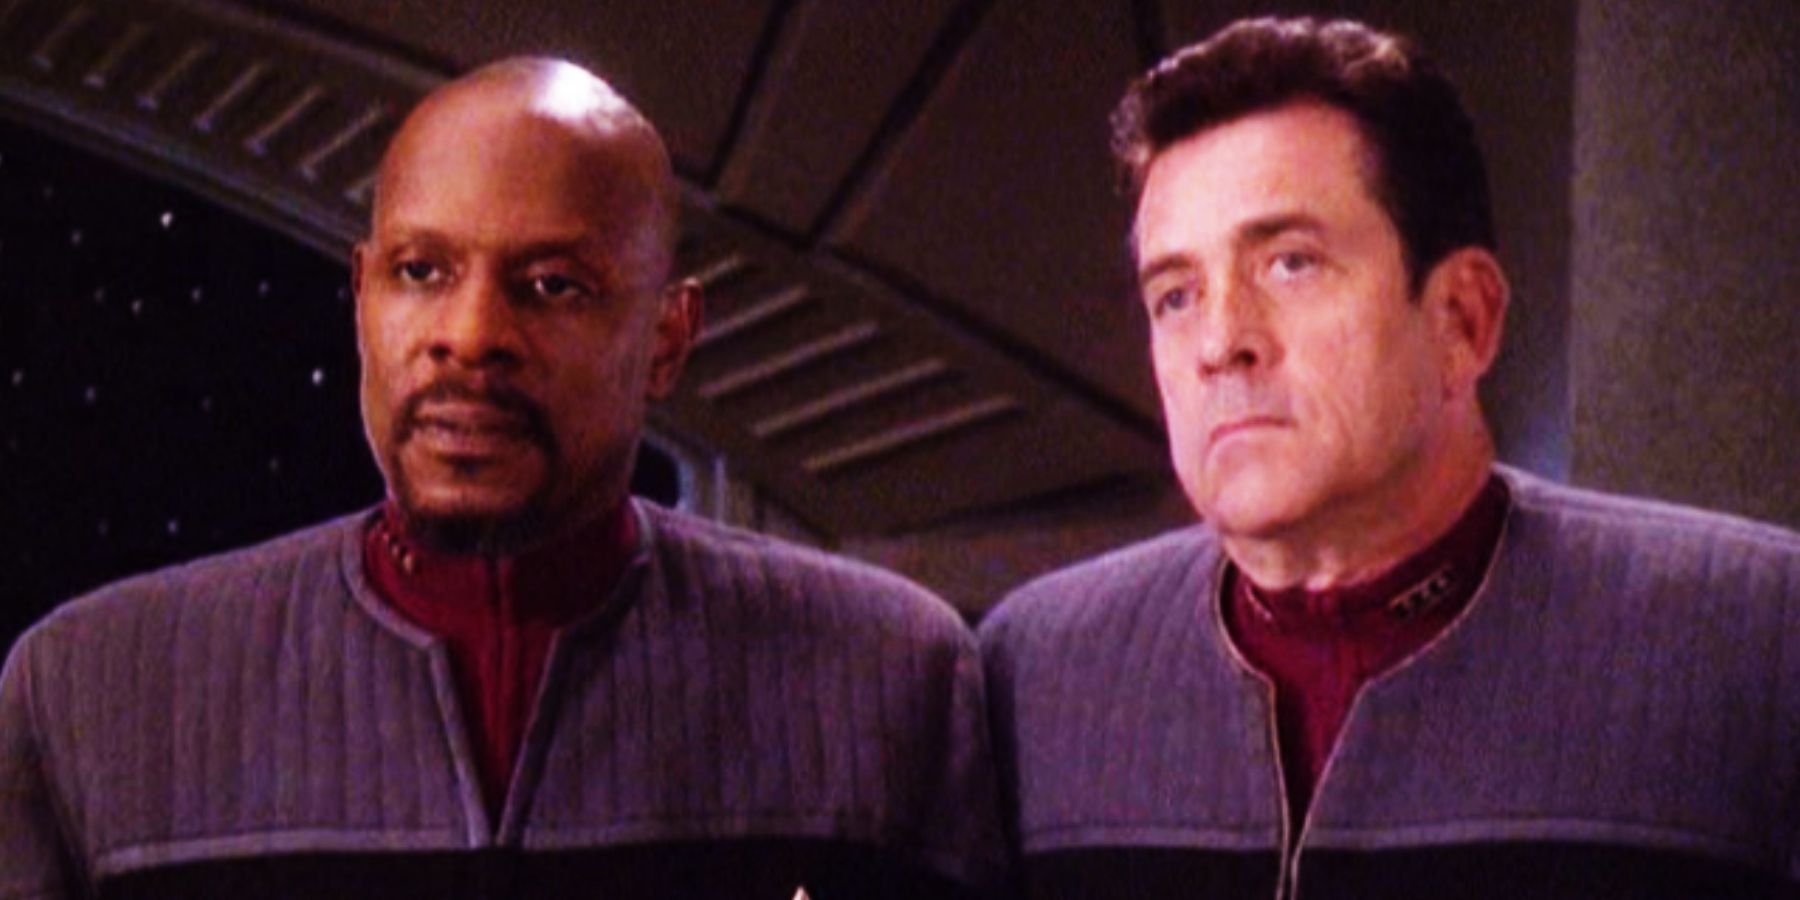 Avery Brooks as Benjamin Sisko and Barry Jenner as Admiral Ross